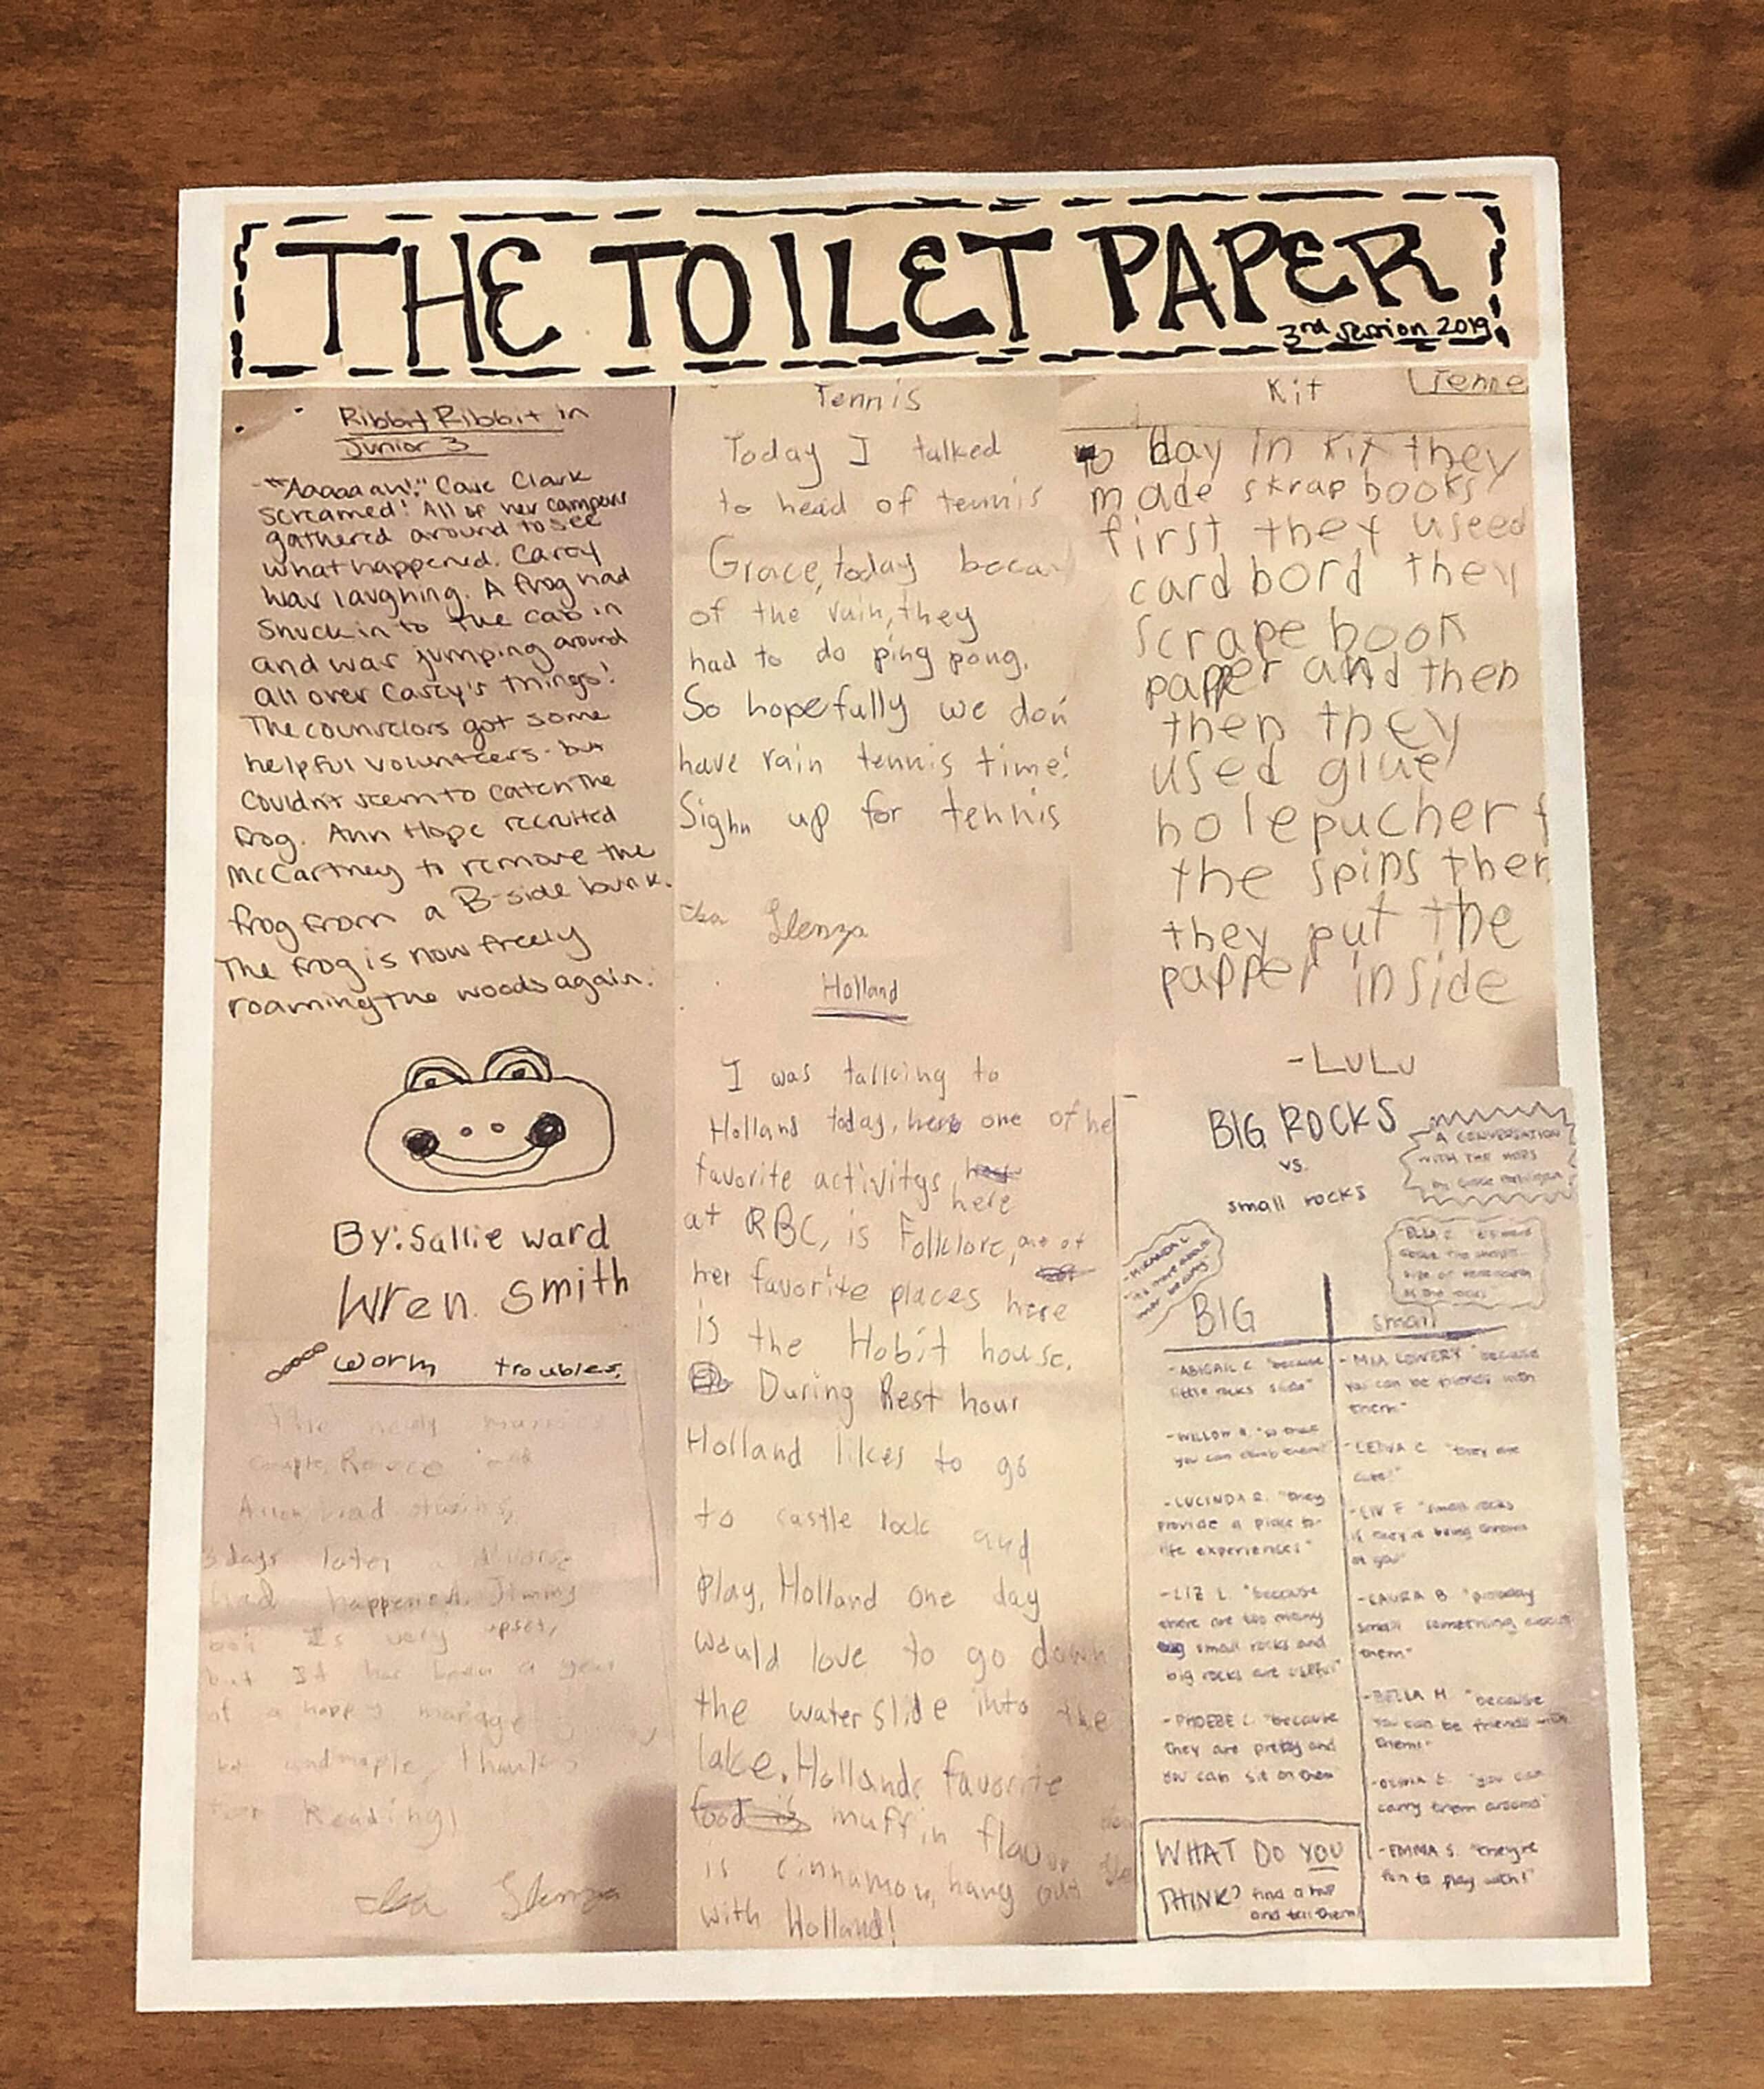 camp newspaper with drawings